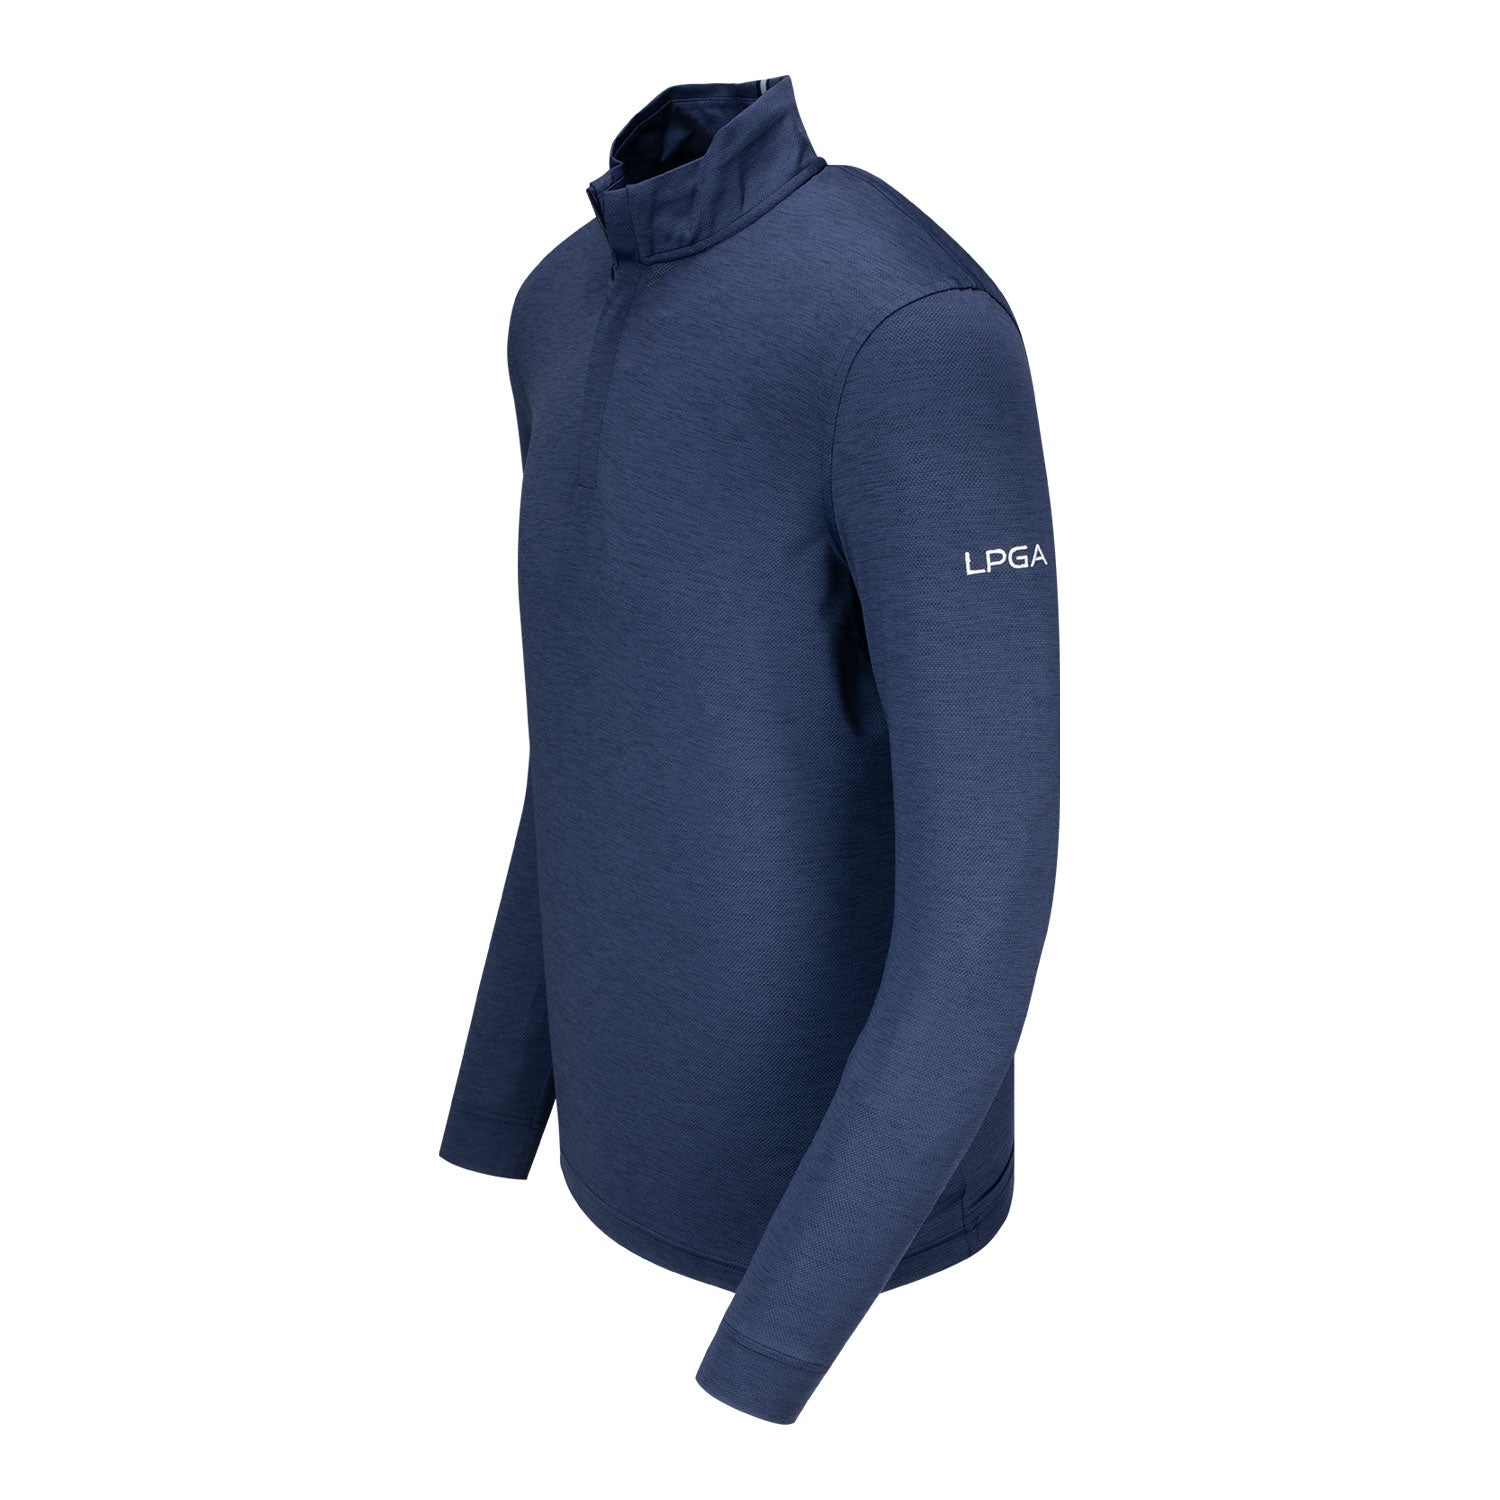 Under Armour 2023 LPGA Men's Playoff 3.0 Heather Quarter Zip - Angled Left Side View